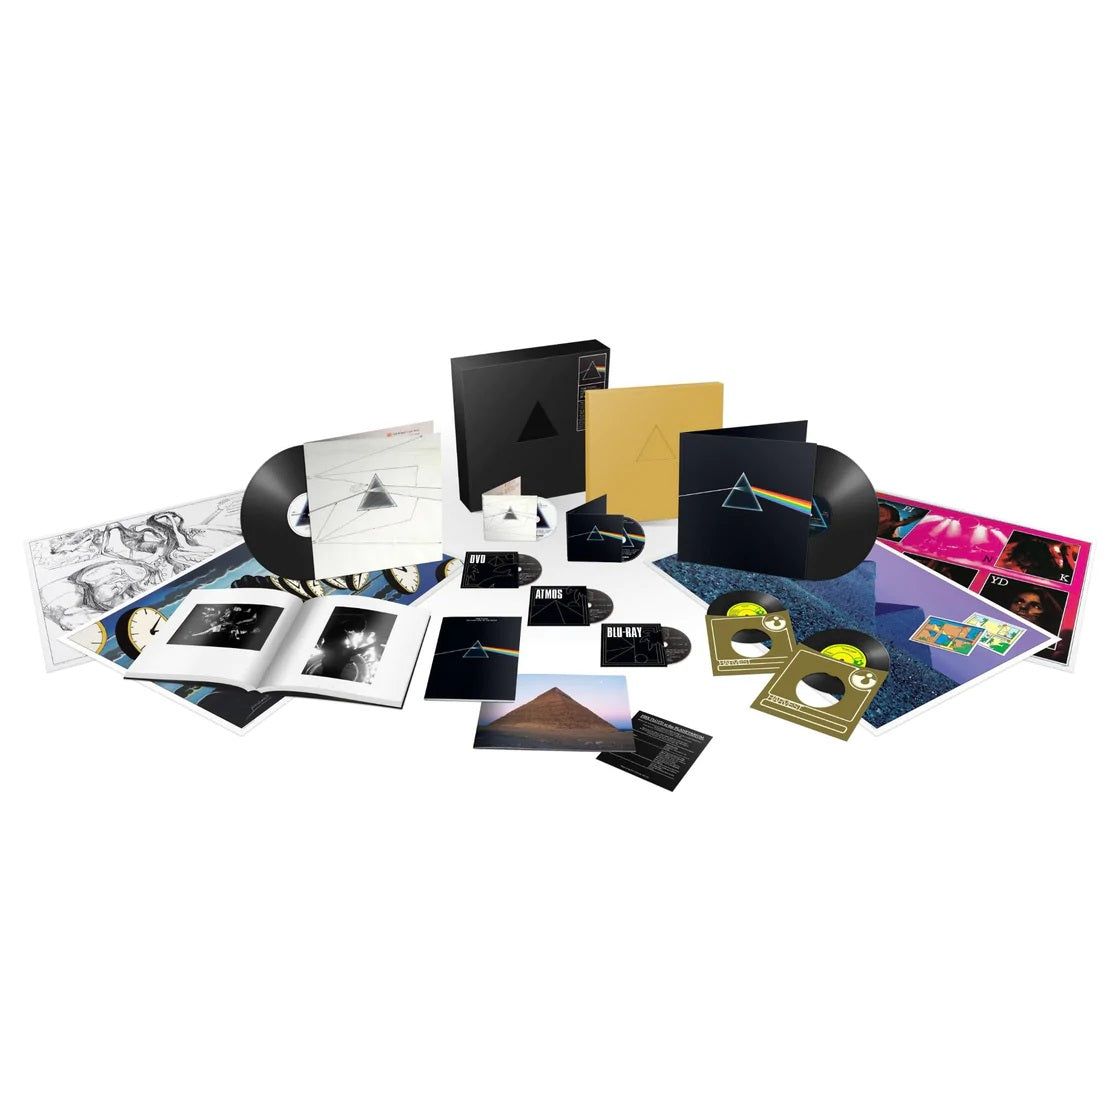 Pink Floyd - Dark Side Of The Moon, The: 50 Years (50th Anniversary Deluxe Box Set 2CD/2LP/2xBlu-Ray/DVD/2x7" replicas/160 page hardback book/76 page music book and memorabilia) - Vinyl - New